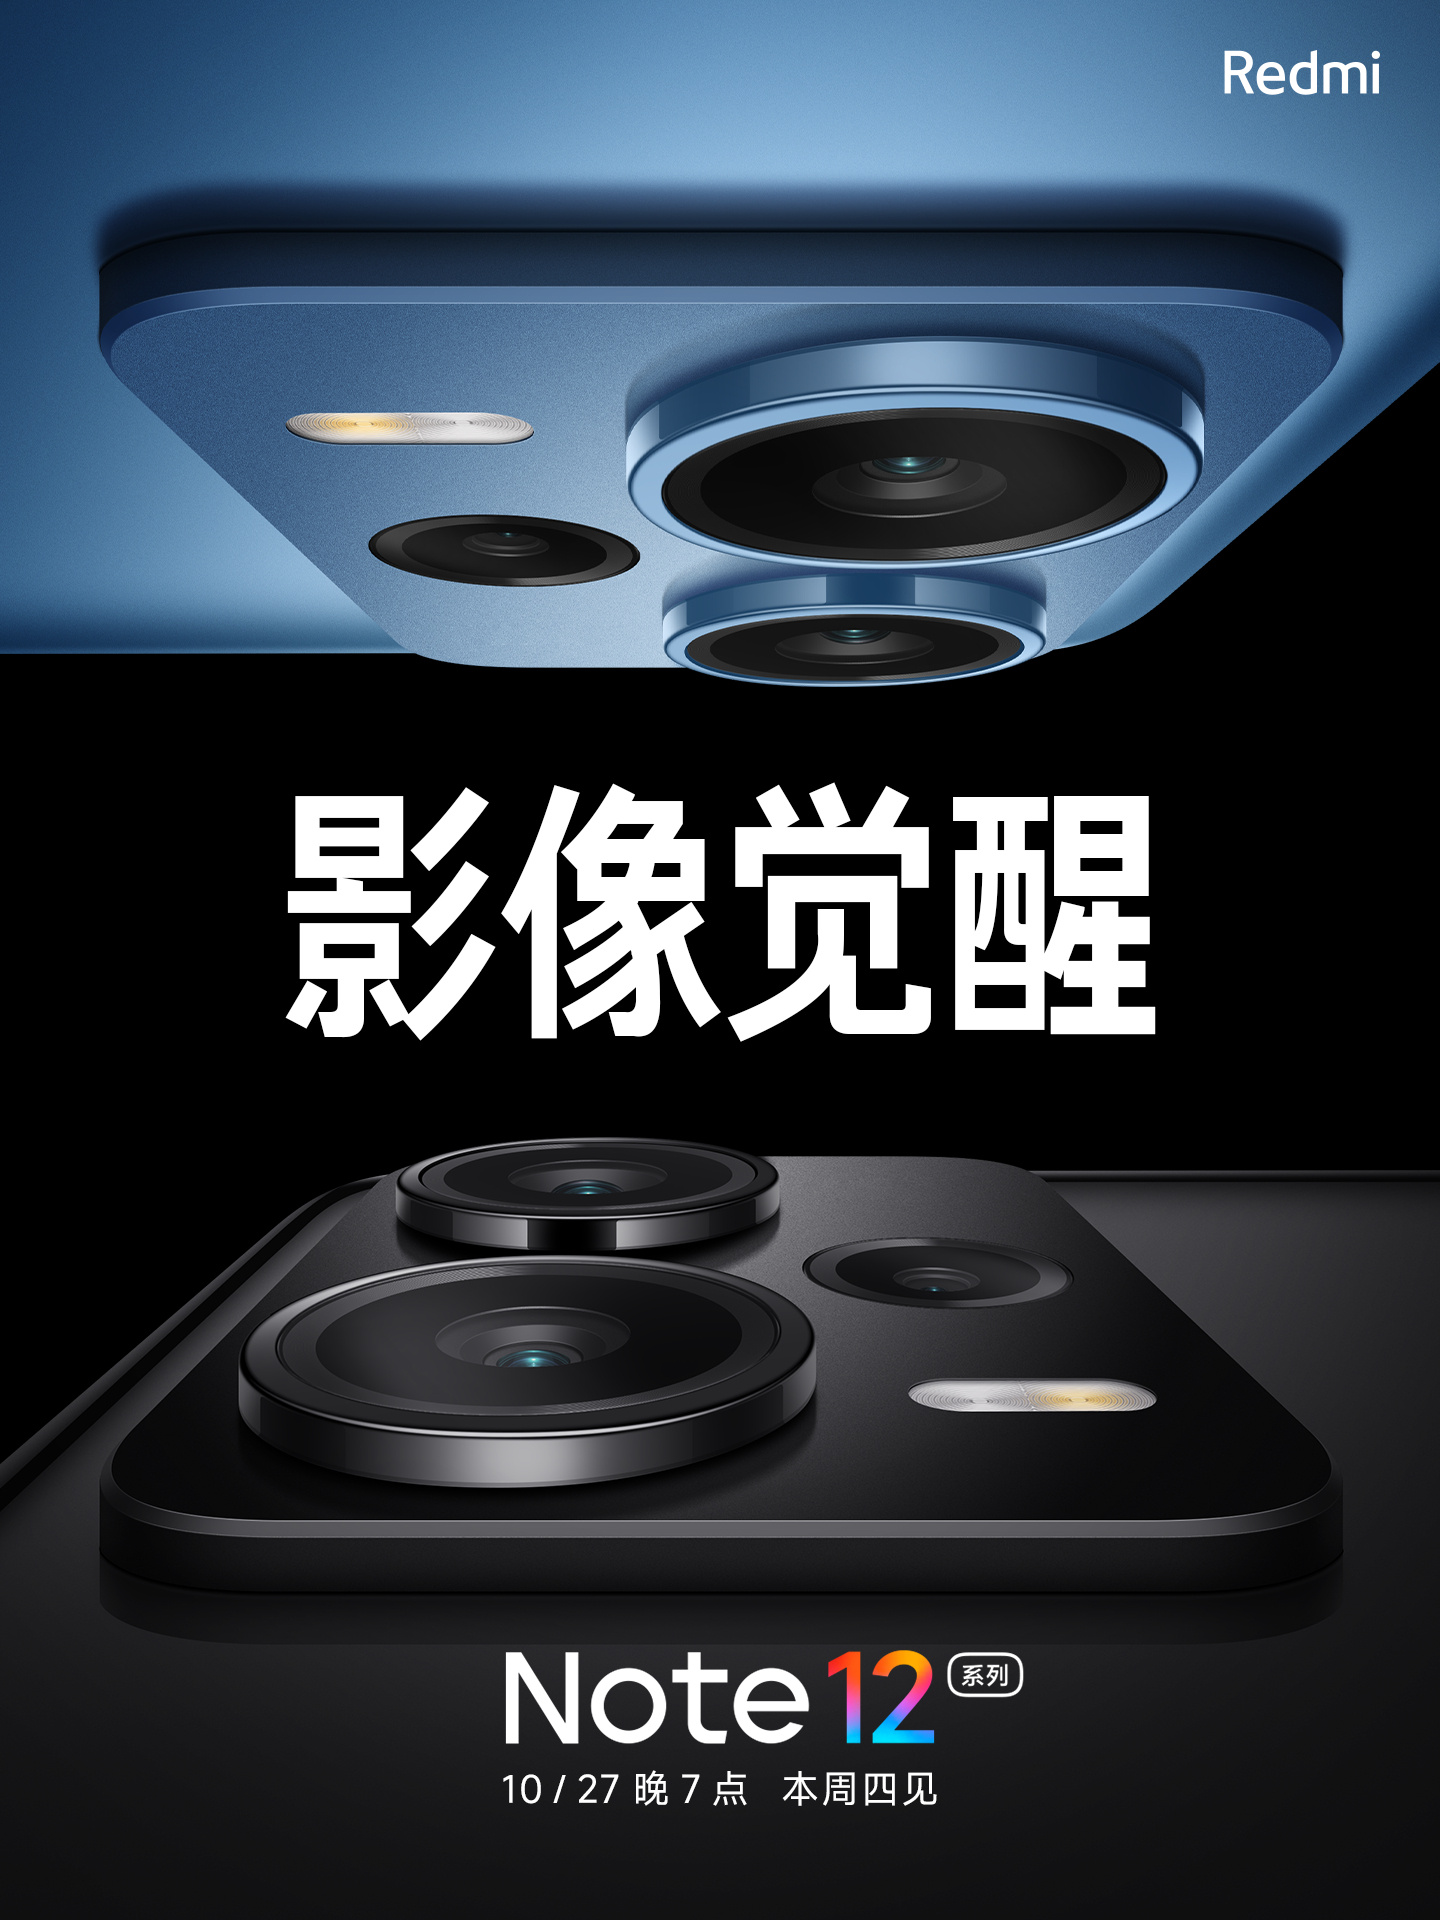 Redmi Note 12 5G Chipset Confirmed: Check Specs and Launch Date